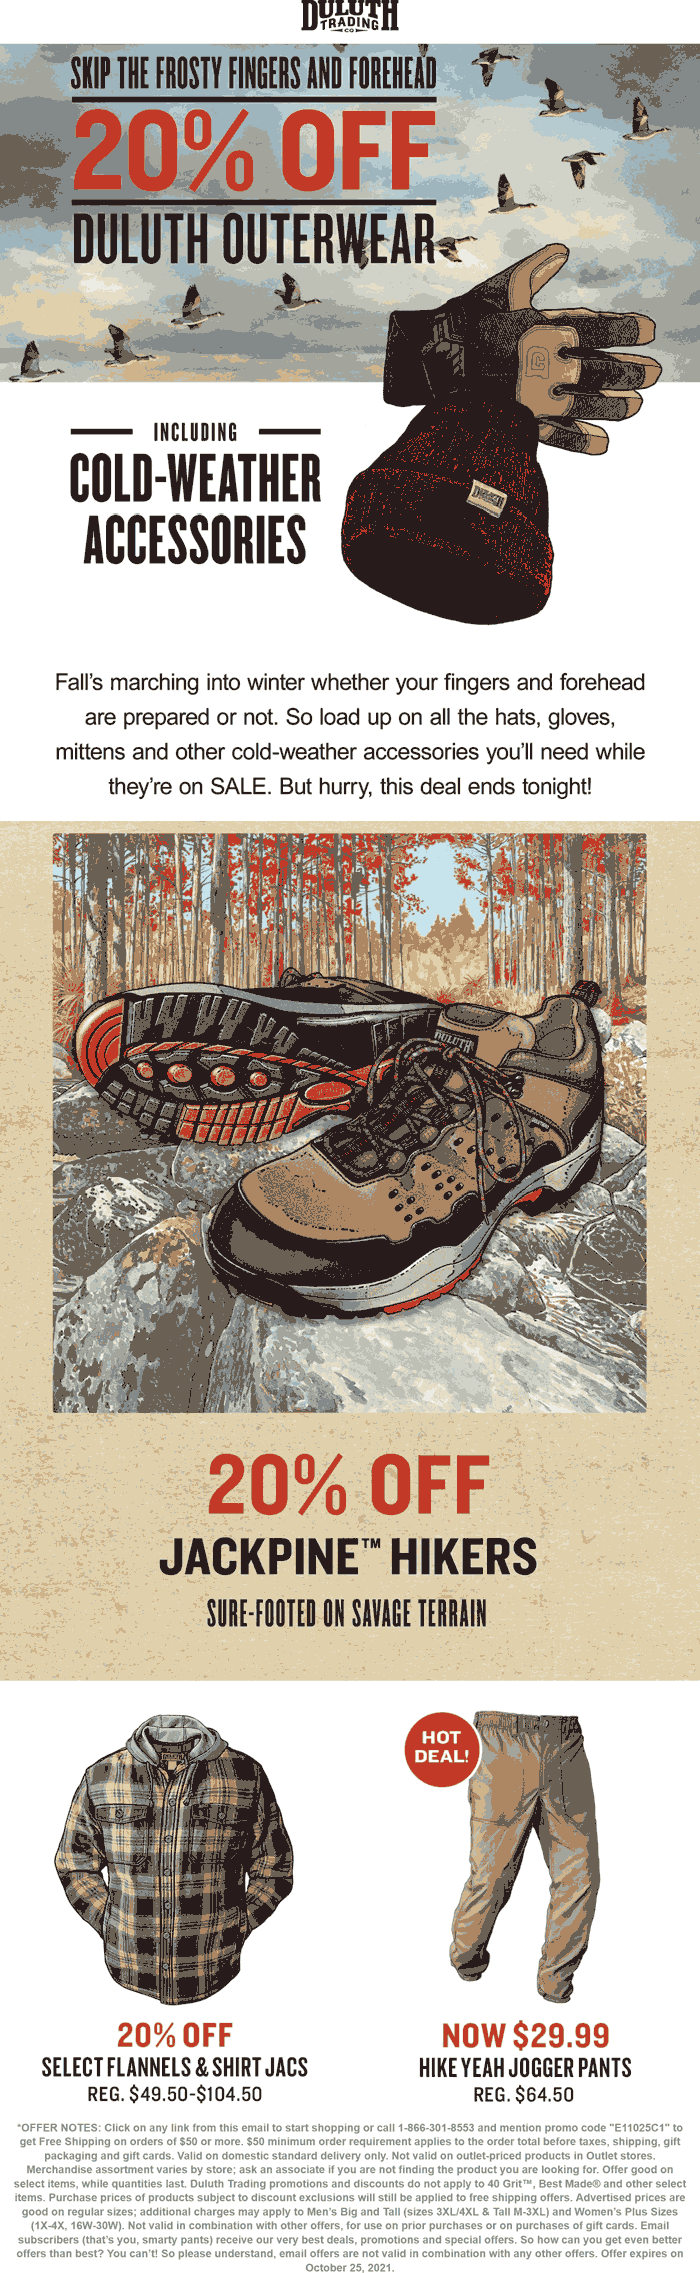 Duluth Trading stores Coupon  20% off outerwear today at Duluth Trading Co via promo code E11025C1 #duluthtrading 